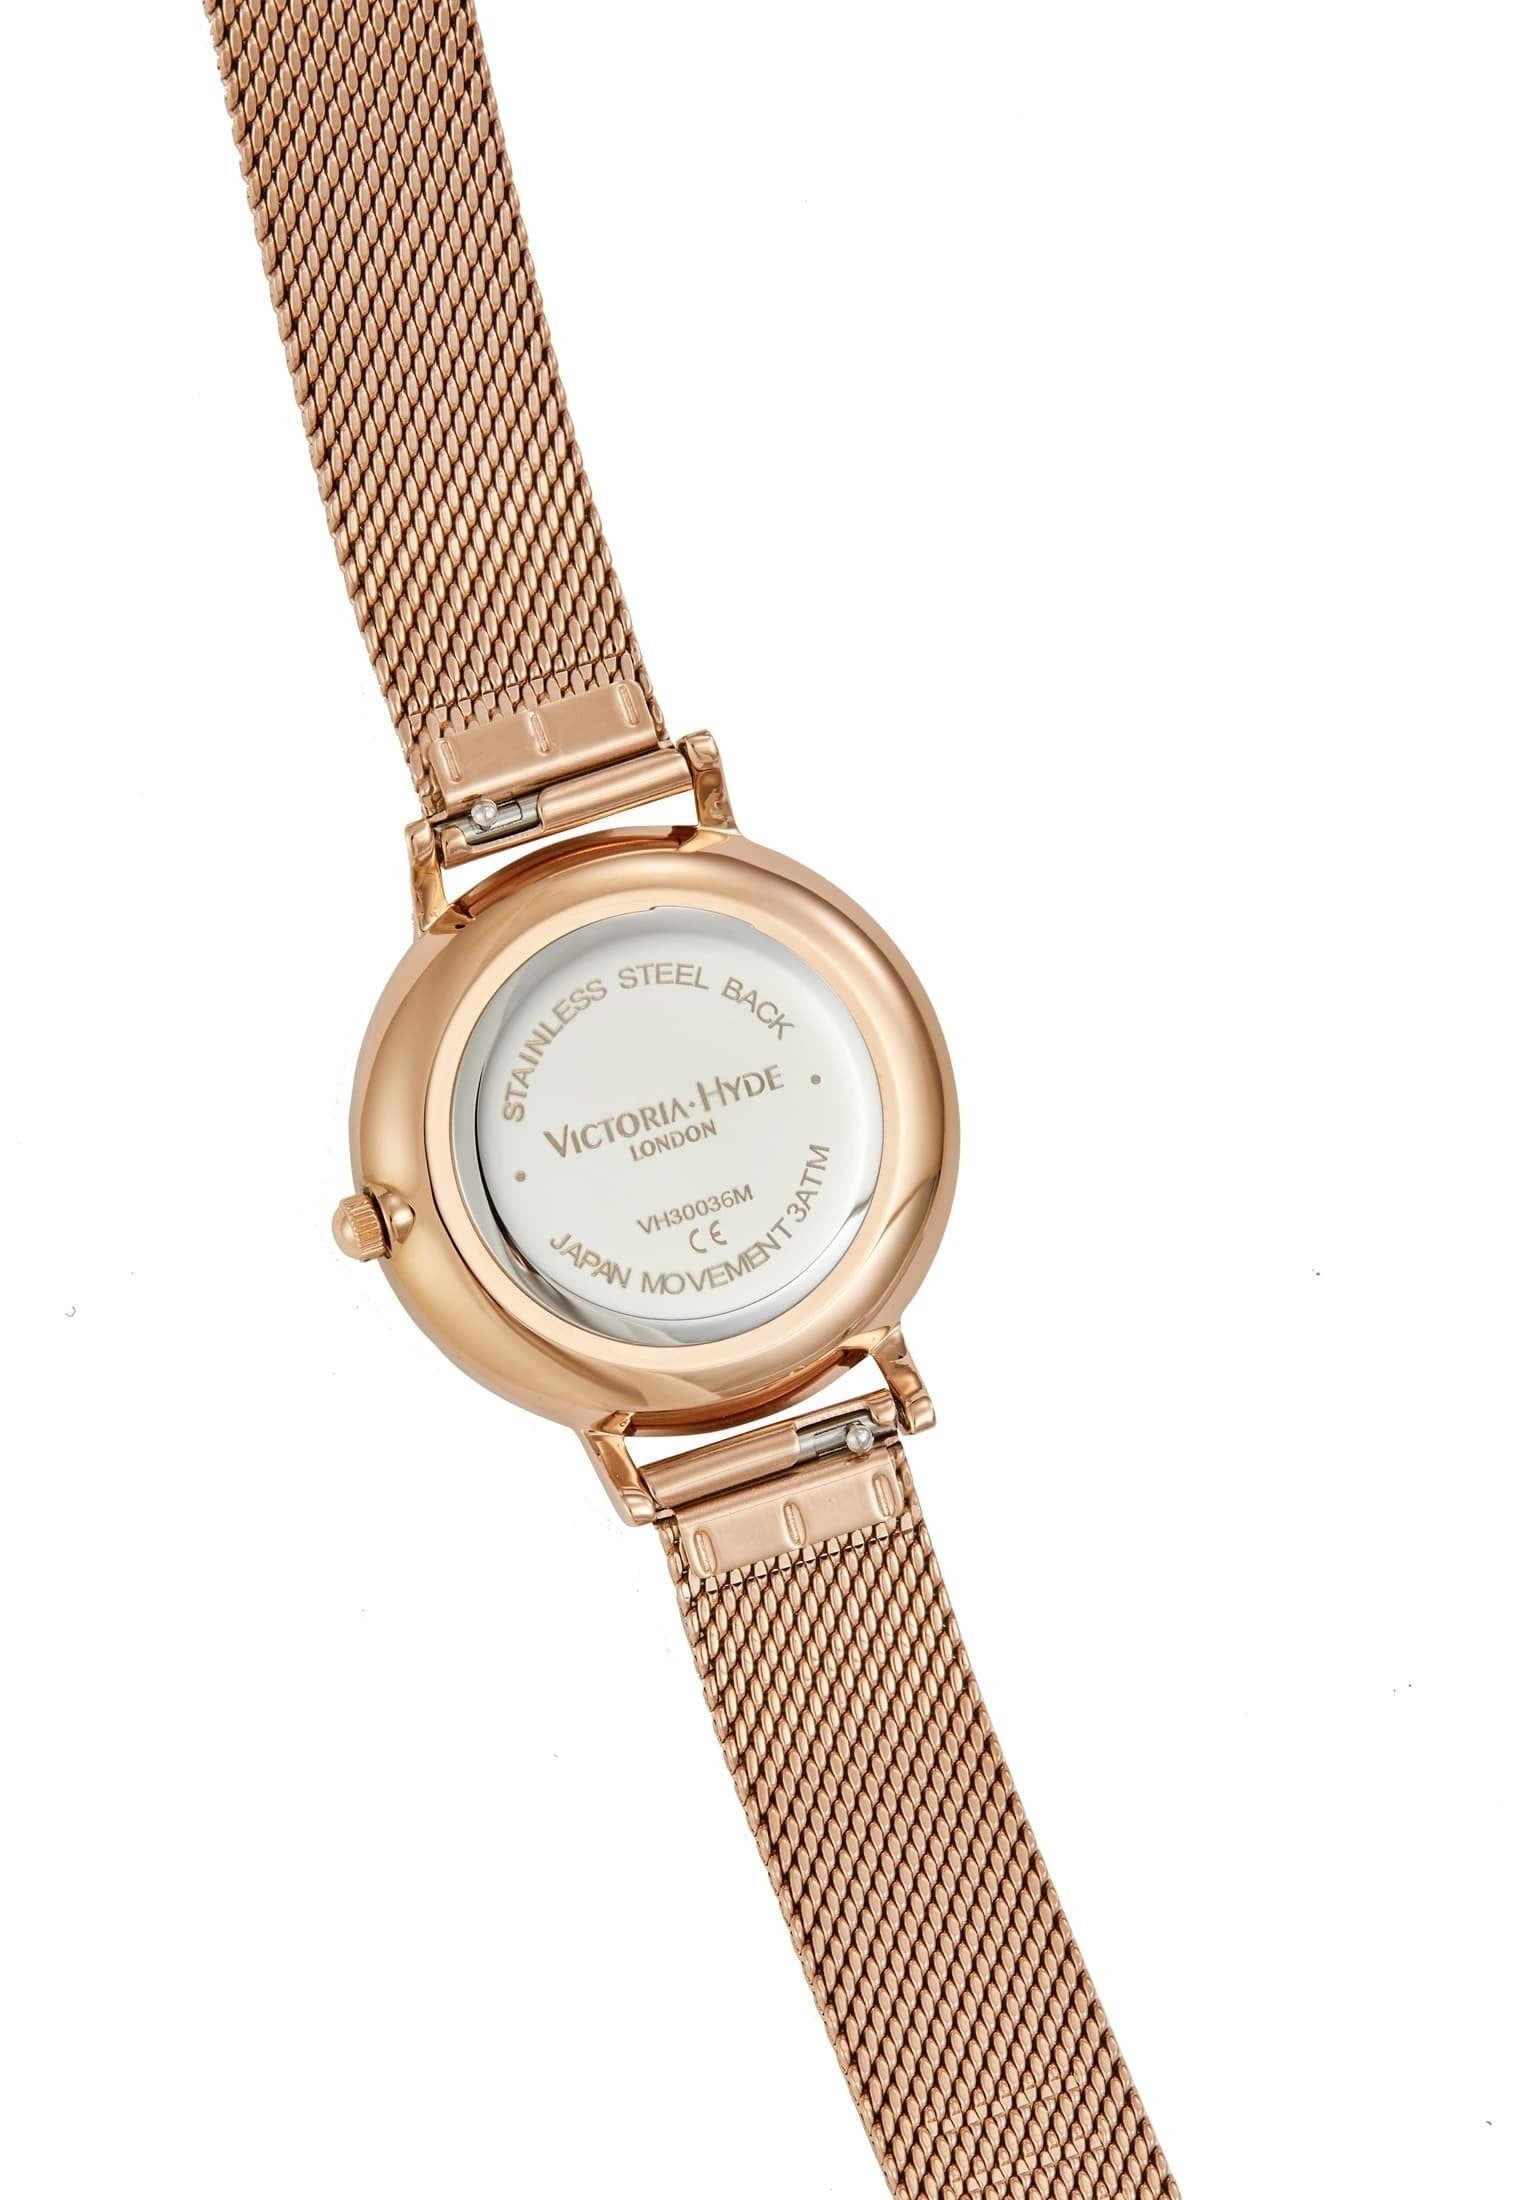 Crystal and rose gold watch for women